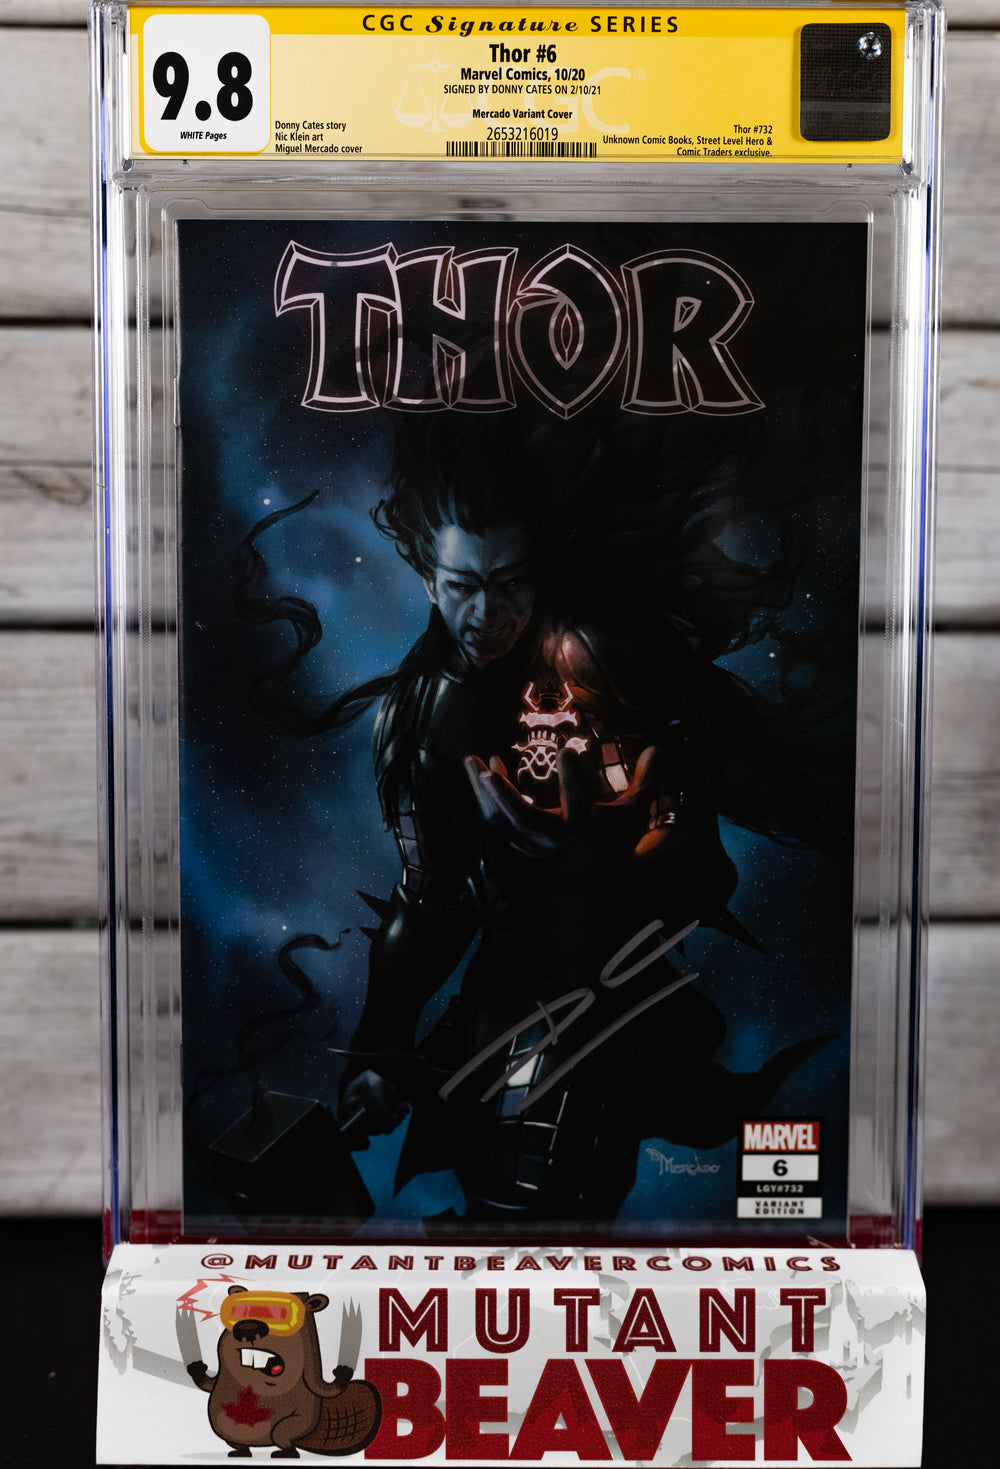 CGC 9.8 SS THOR #6 Miguel Mercado (SIGNED BY DONNY CATES) TRADE DRESS EXCLUSIVE